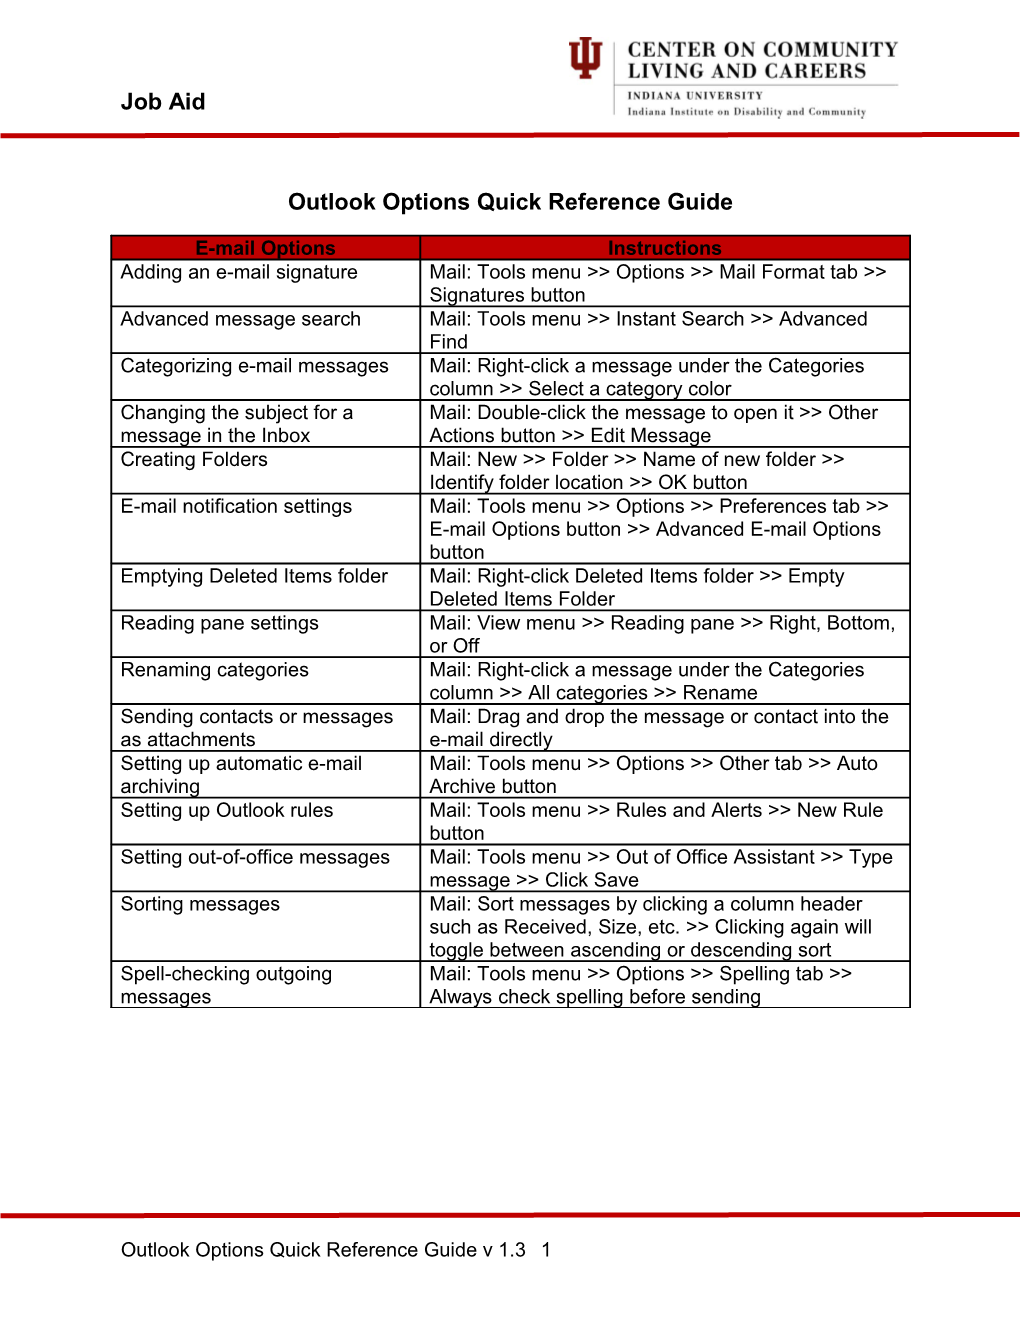 Outlook Options Quick Reference Guide